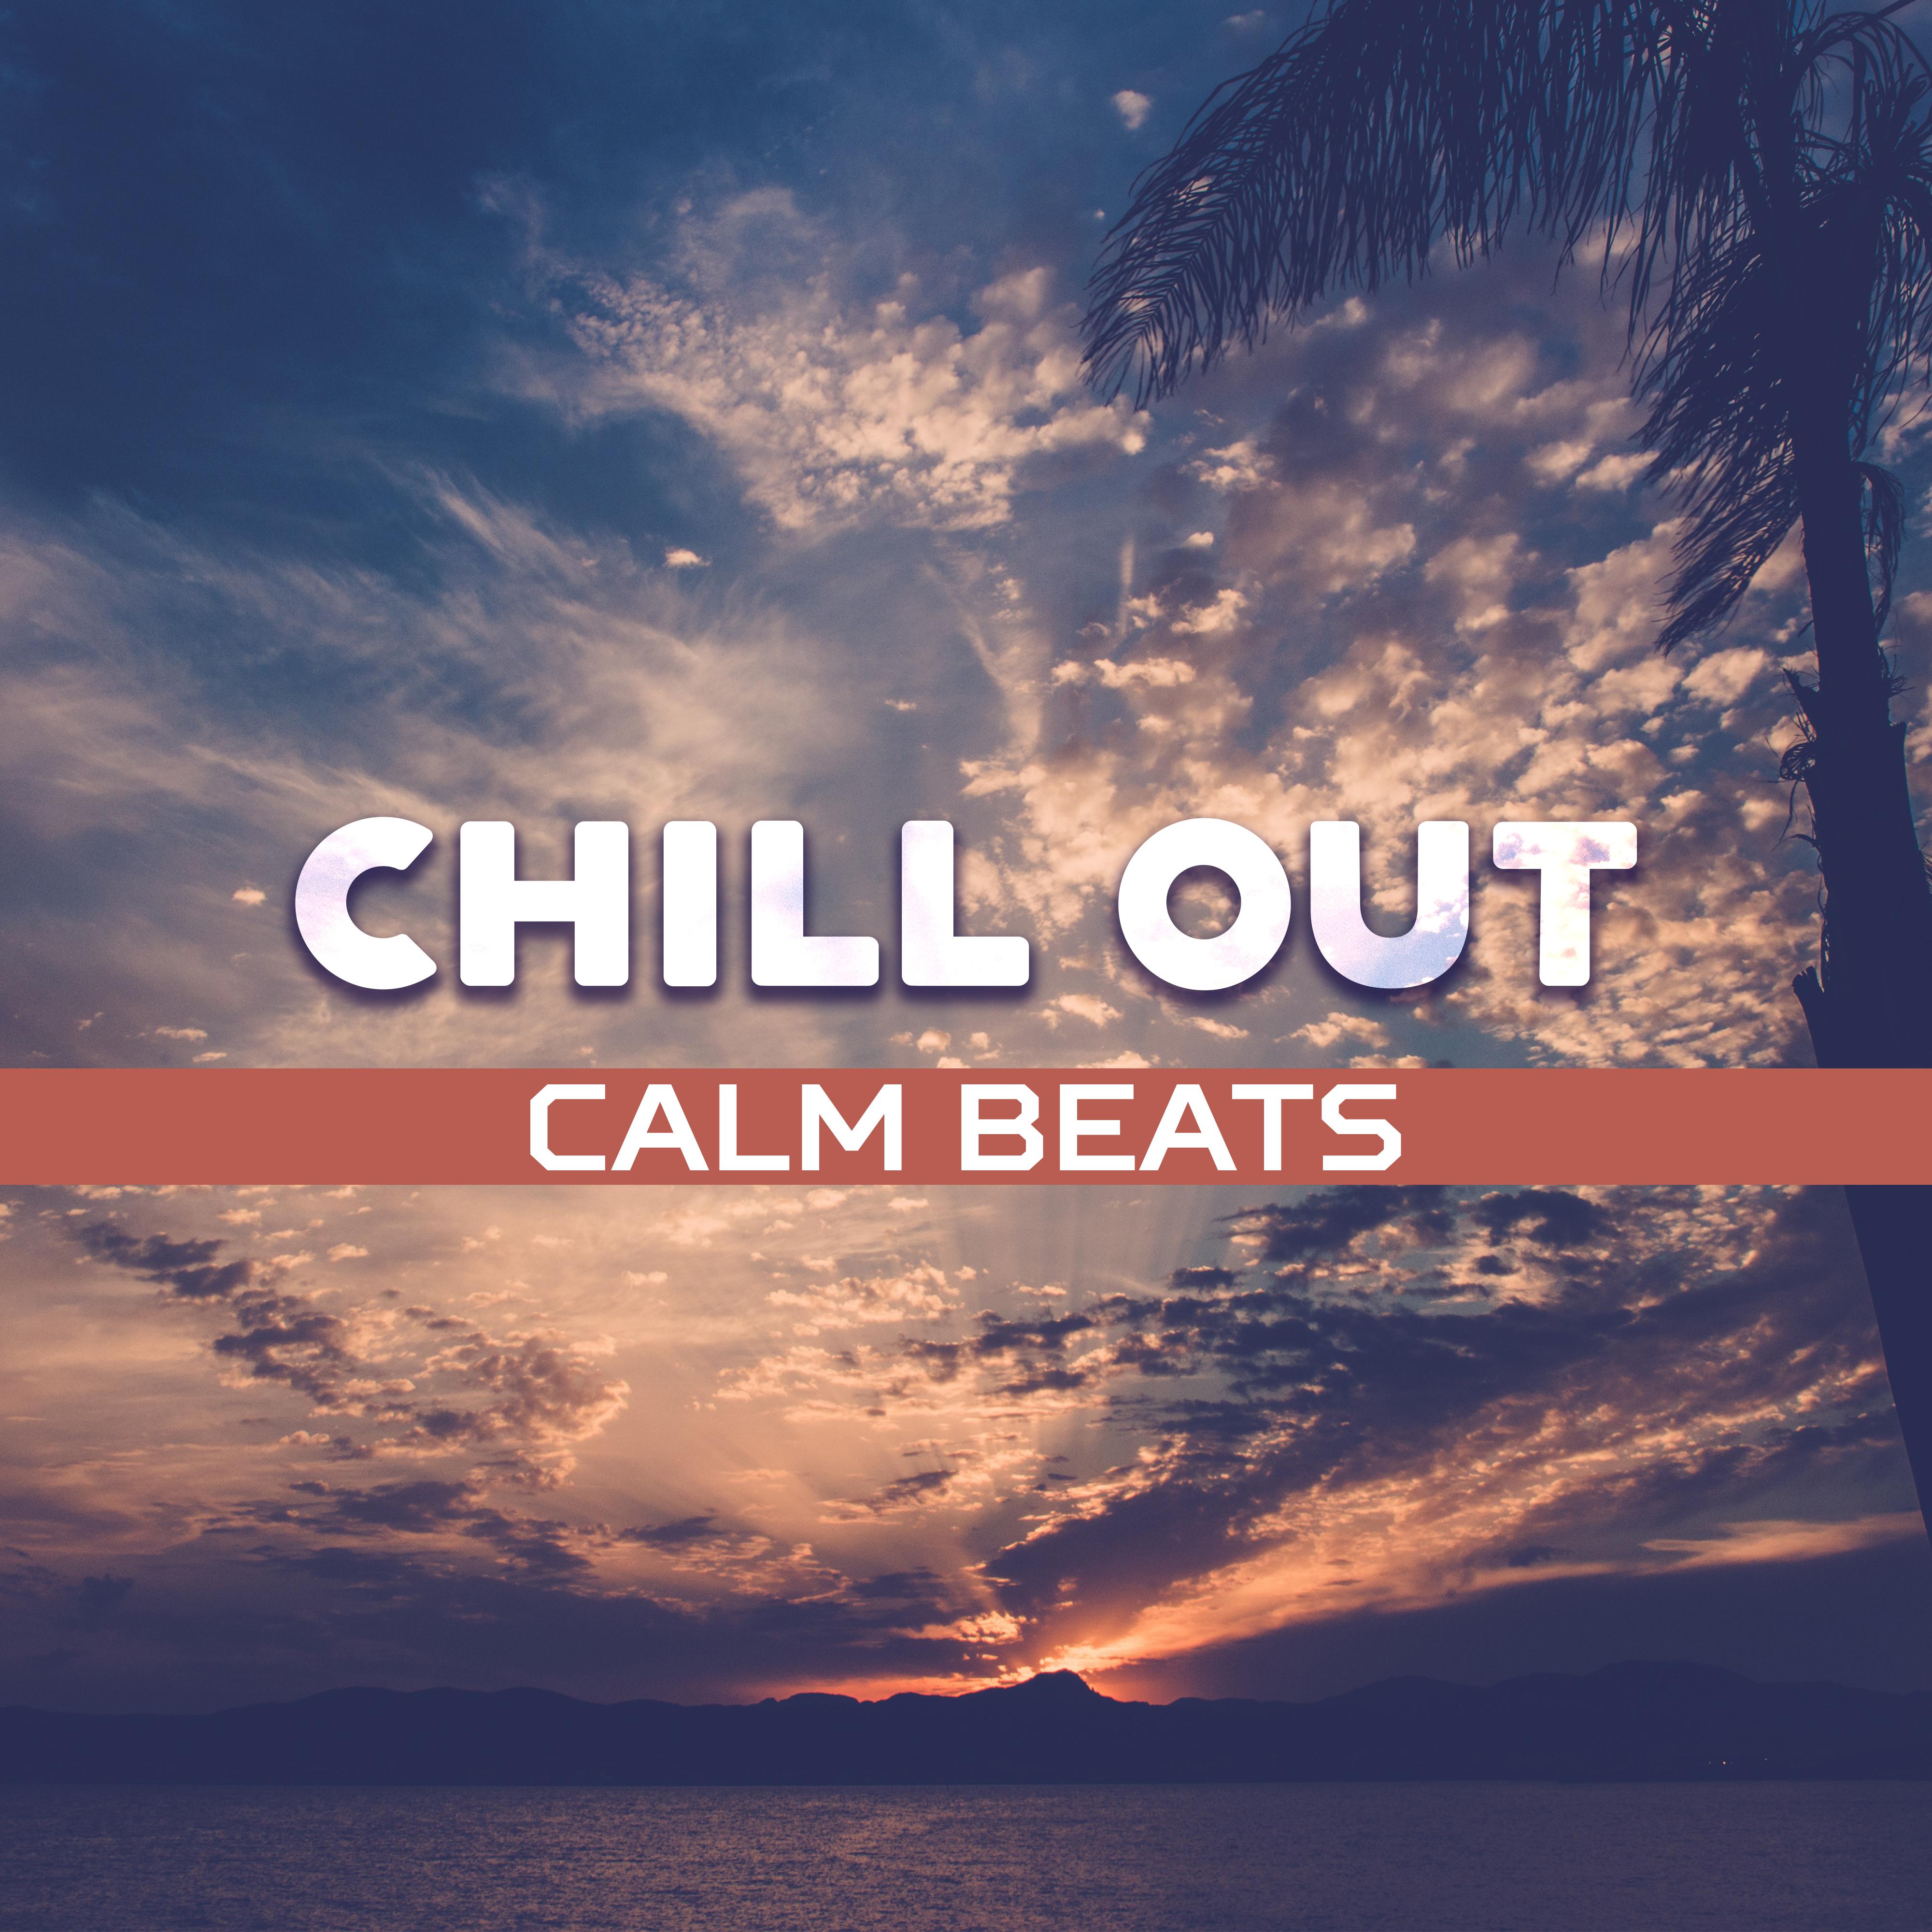 Chill Out Calm Beats – Relaxing Beats of Summer, Calm Beach Waves, Holiday Memories, Chill Out Music